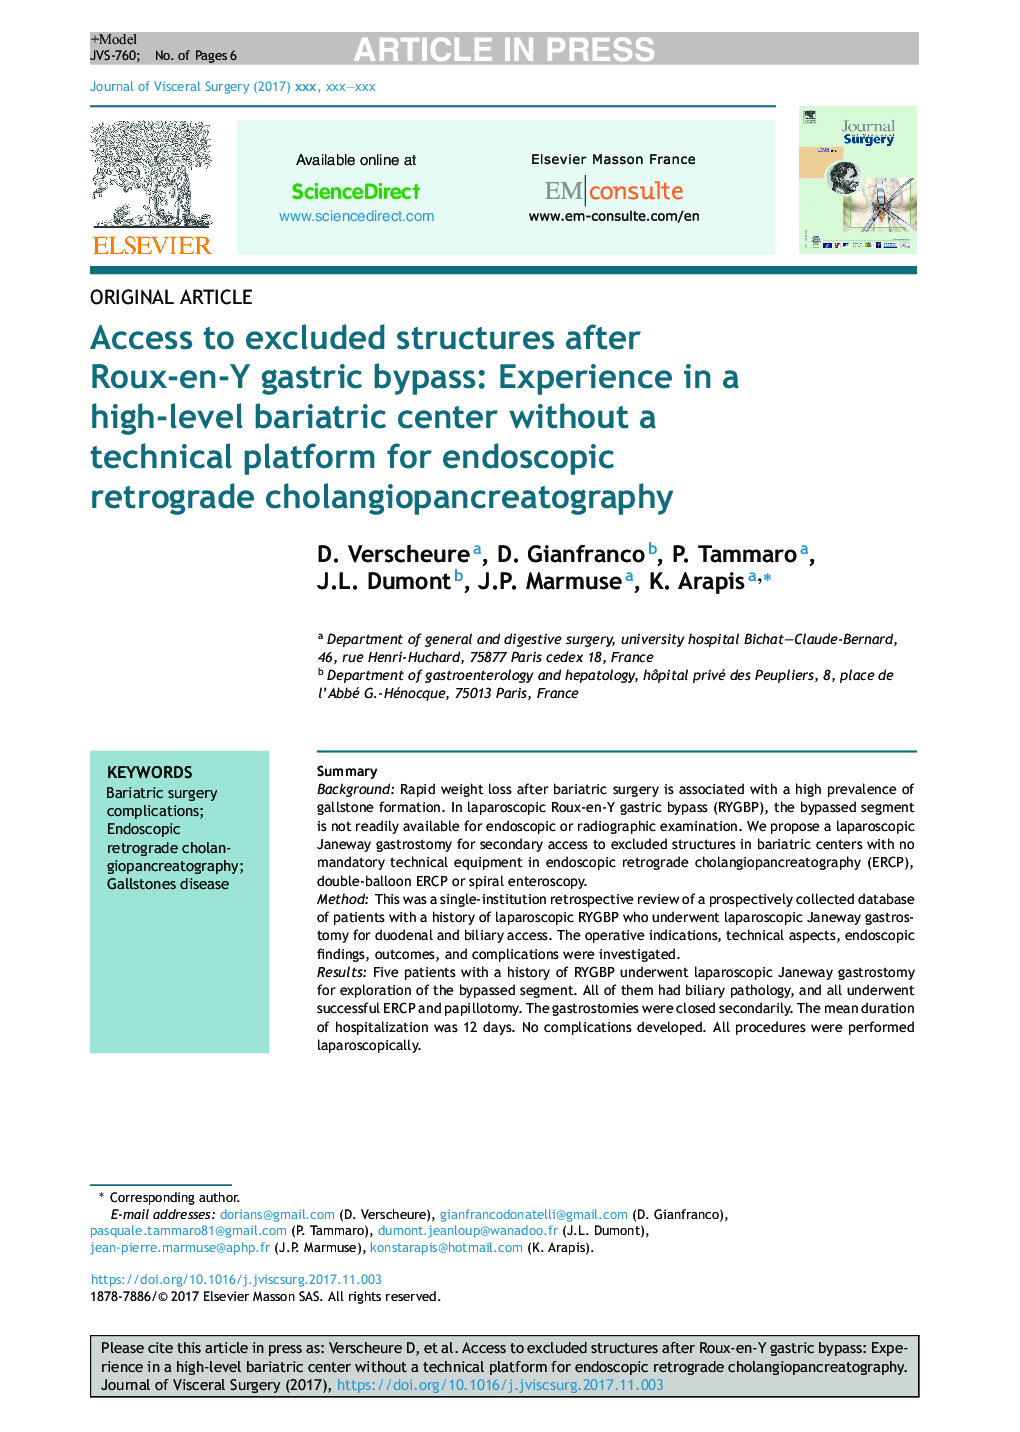 Access to excluded structures after Roux-en-Y gastric bypass: Experience in a high-level bariatric center without a technical platform for endoscopic retrograde cholangiopancreatography